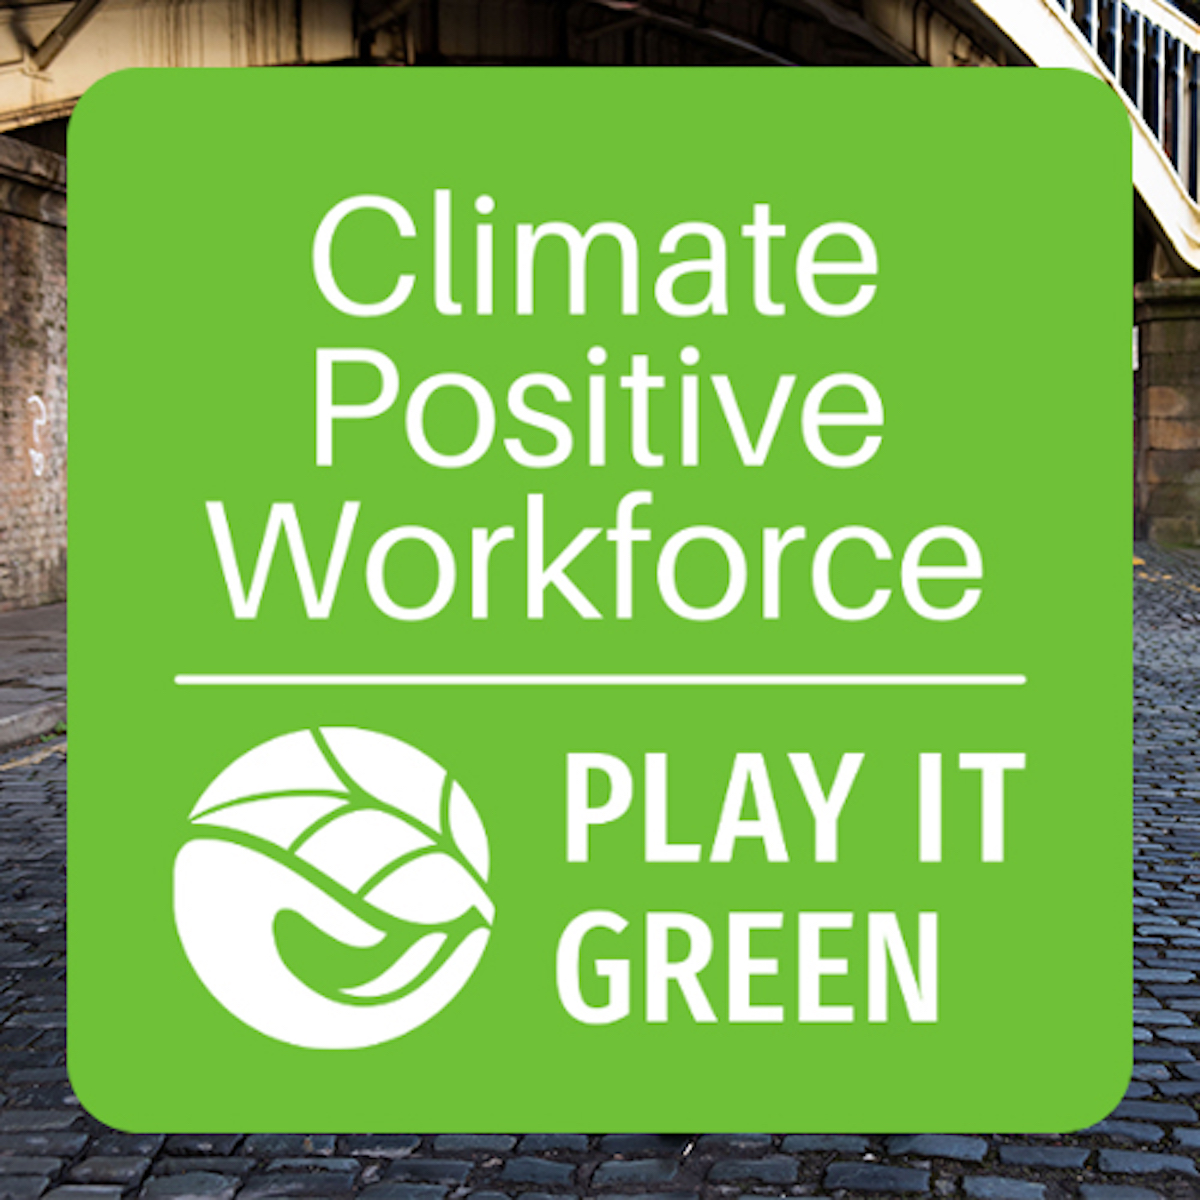 Climate Positive Workforce, Play It Green